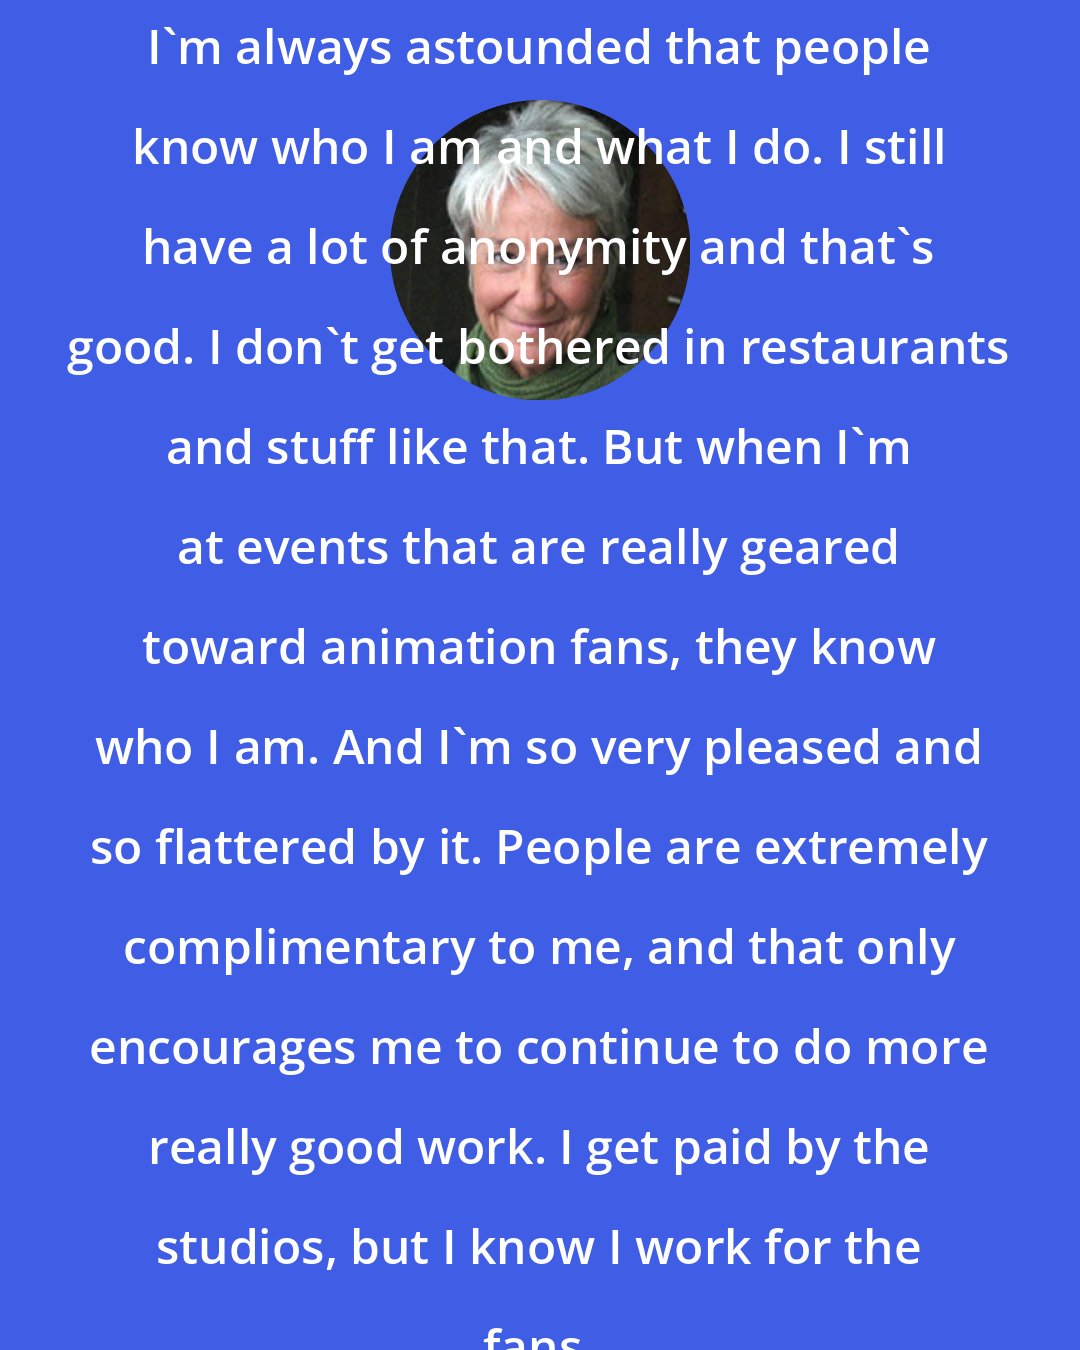 Andrea Romano: I'm always astounded that people know who I am and what I do. I still have a lot of anonymity and that's good. I don't get bothered in restaurants and stuff like that. But when I'm at events that are really geared toward animation fans, they know who I am. And I'm so very pleased and so flattered by it. People are extremely complimentary to me, and that only encourages me to continue to do more really good work. I get paid by the studios, but I know I work for the fans.